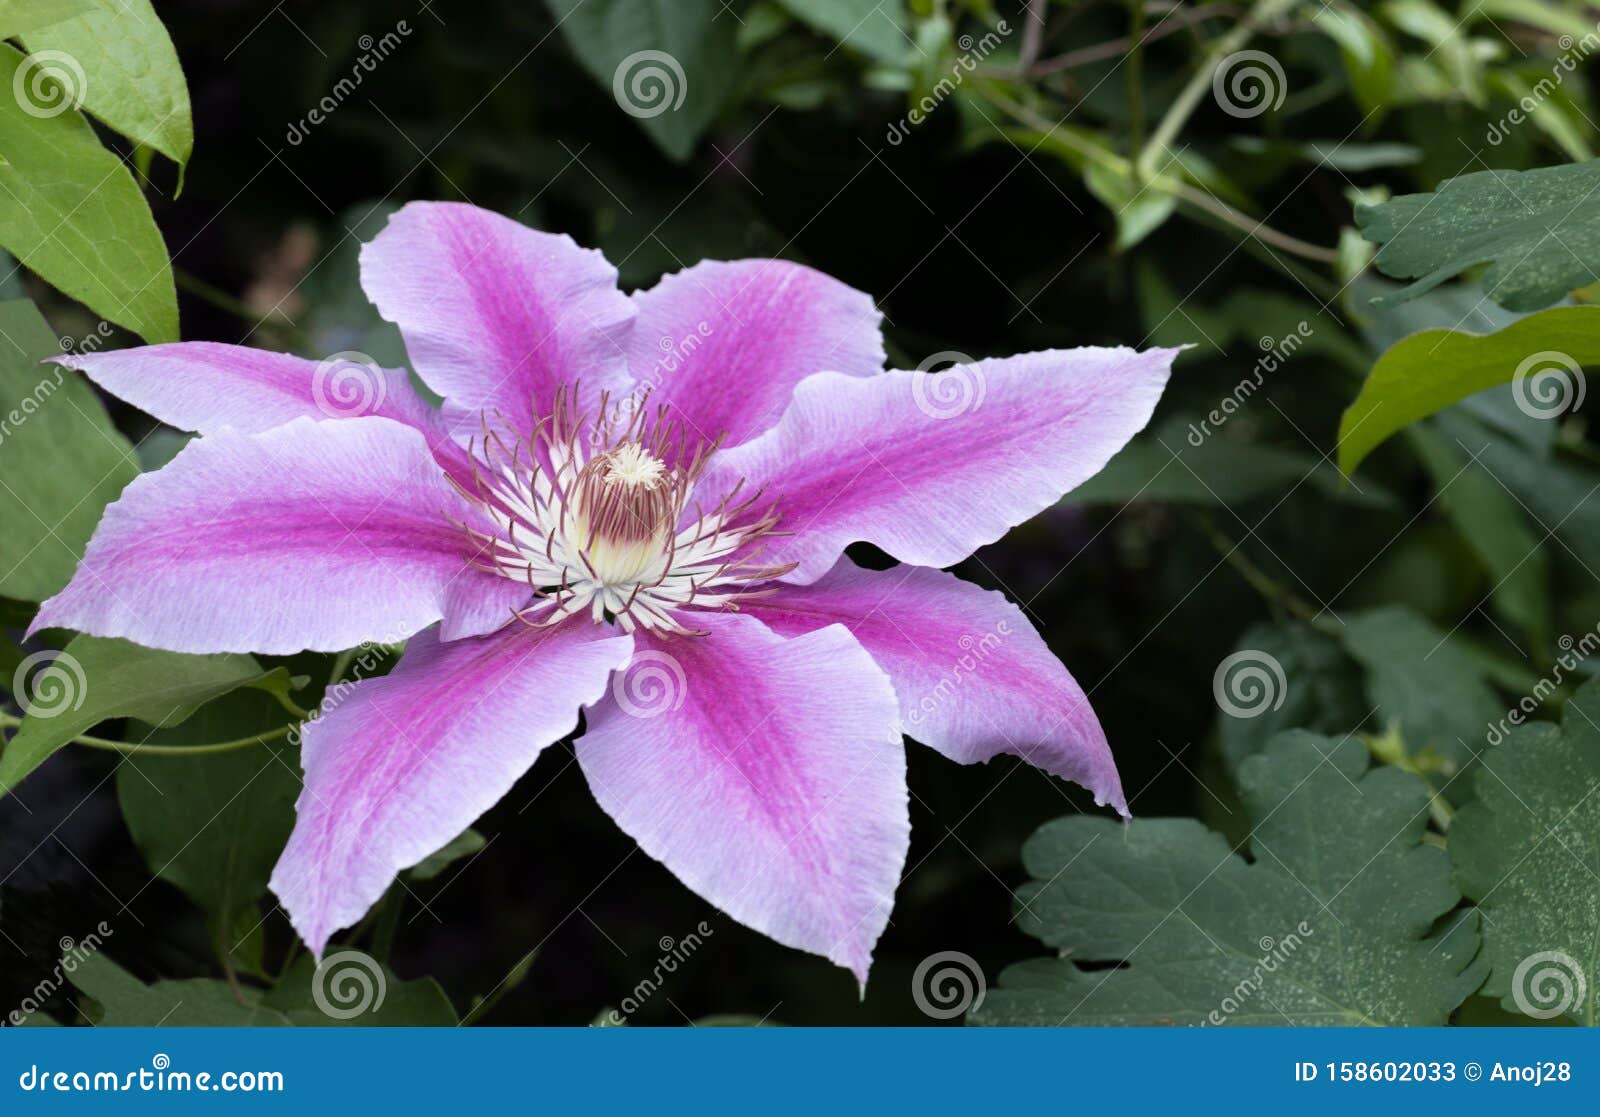 Light purple clematis with pink veins on the background of green foliage, close-up